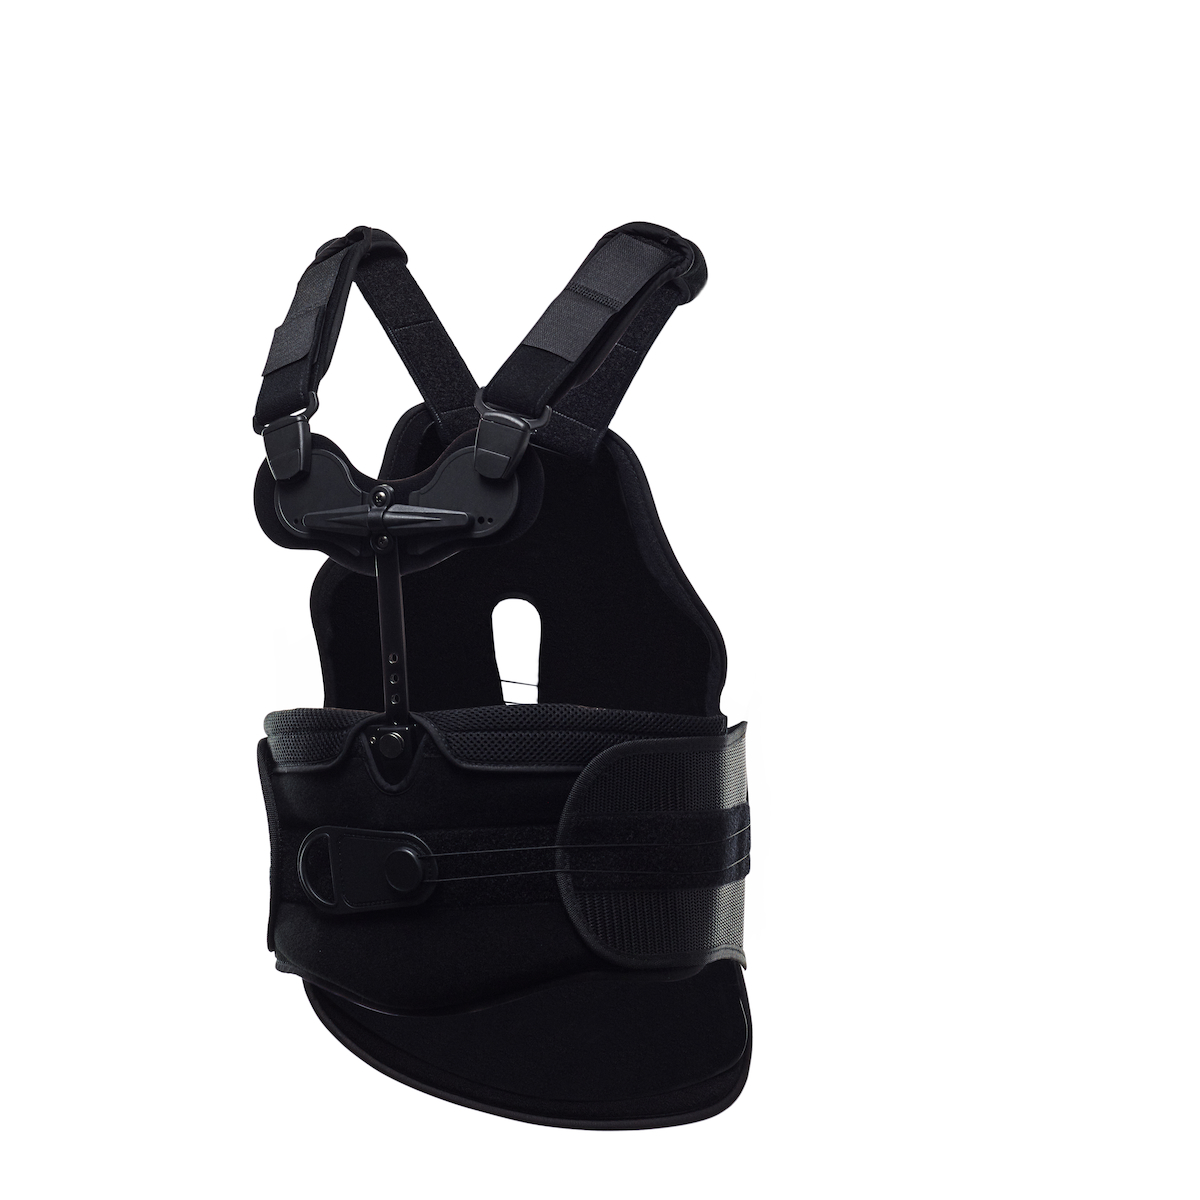 TLSO Brace With Pulley Strap System